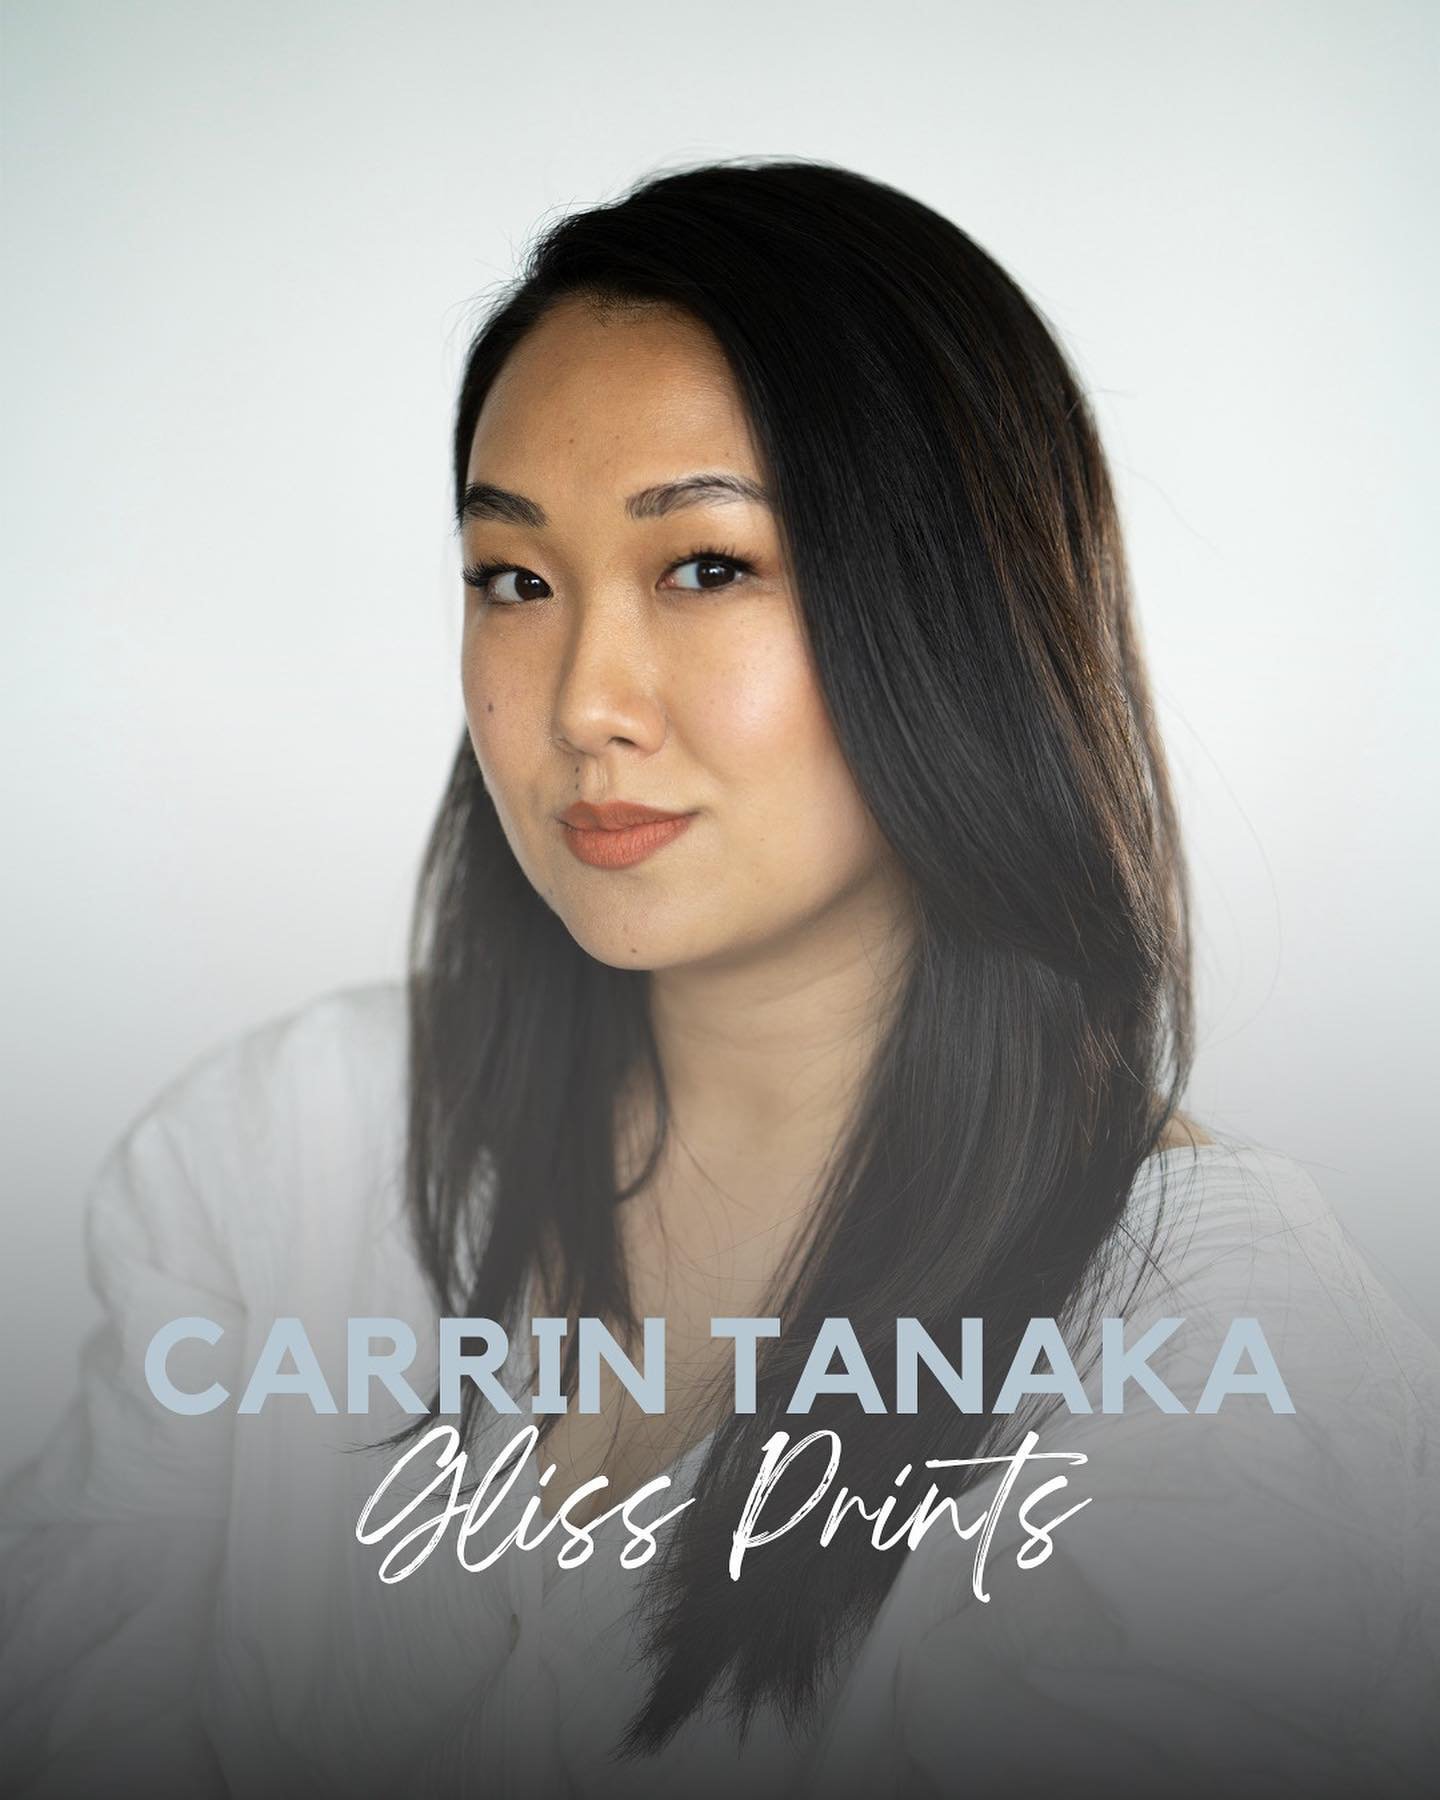 Composition Corner is honored to feature Carrin Tanaka of @glissprints! 🎶

Carrin is a LA based music composer and graphic designer who turns music concepts into visual artwork. She holds a degree in music composition and has found her niche collabo